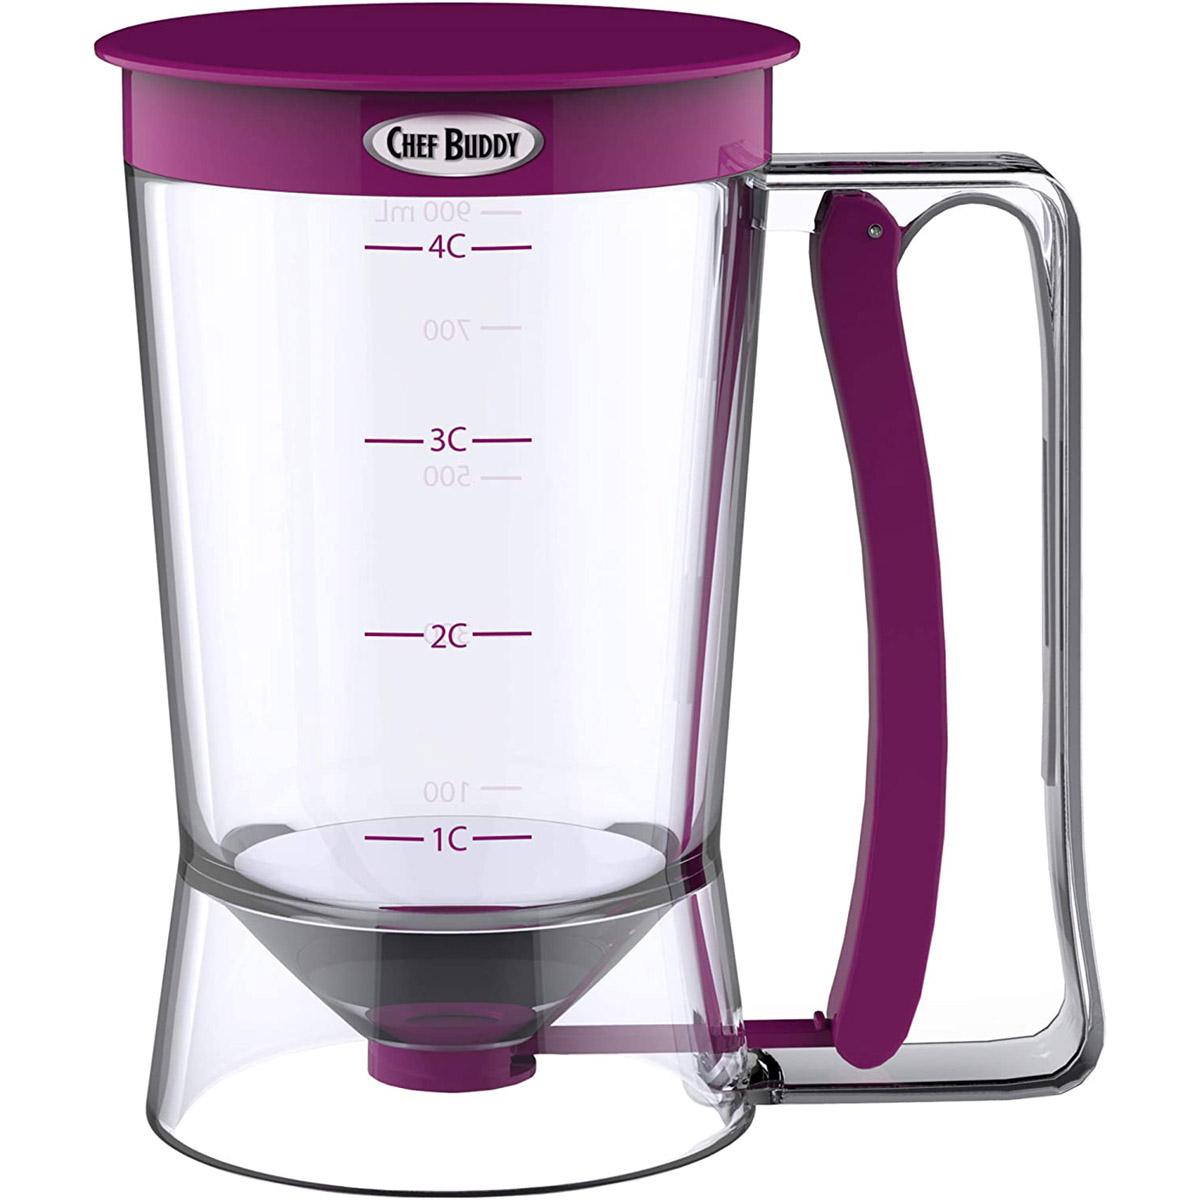 Chef Buddy 4-Cup Batter Dispenser for $8.97